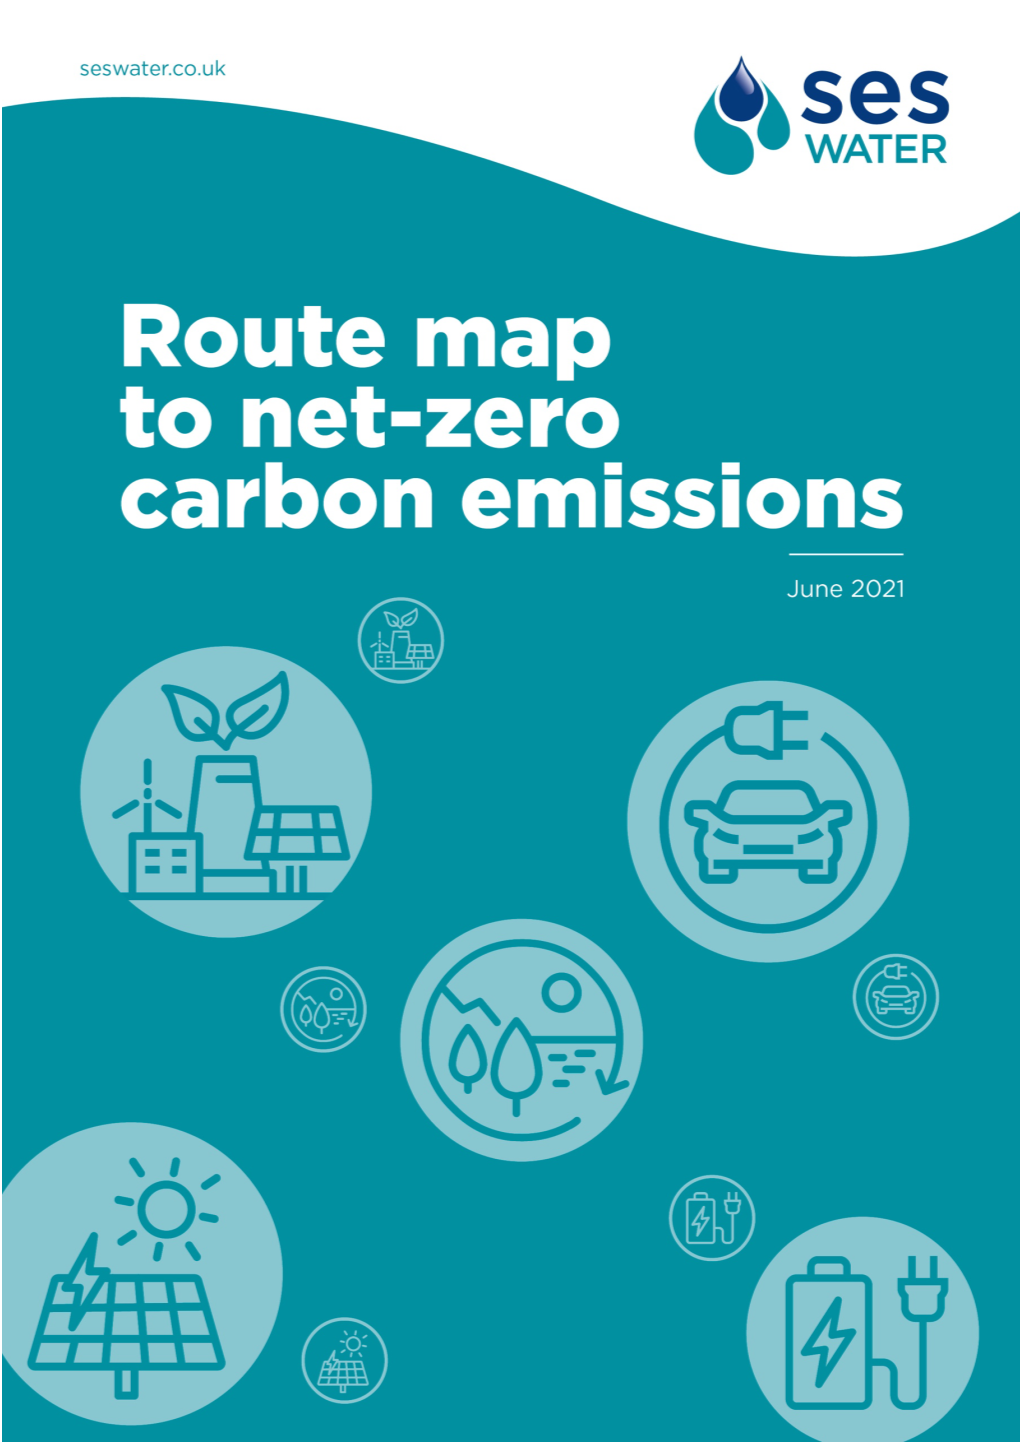 Find out More About Our Net Zero Carbon Routemap